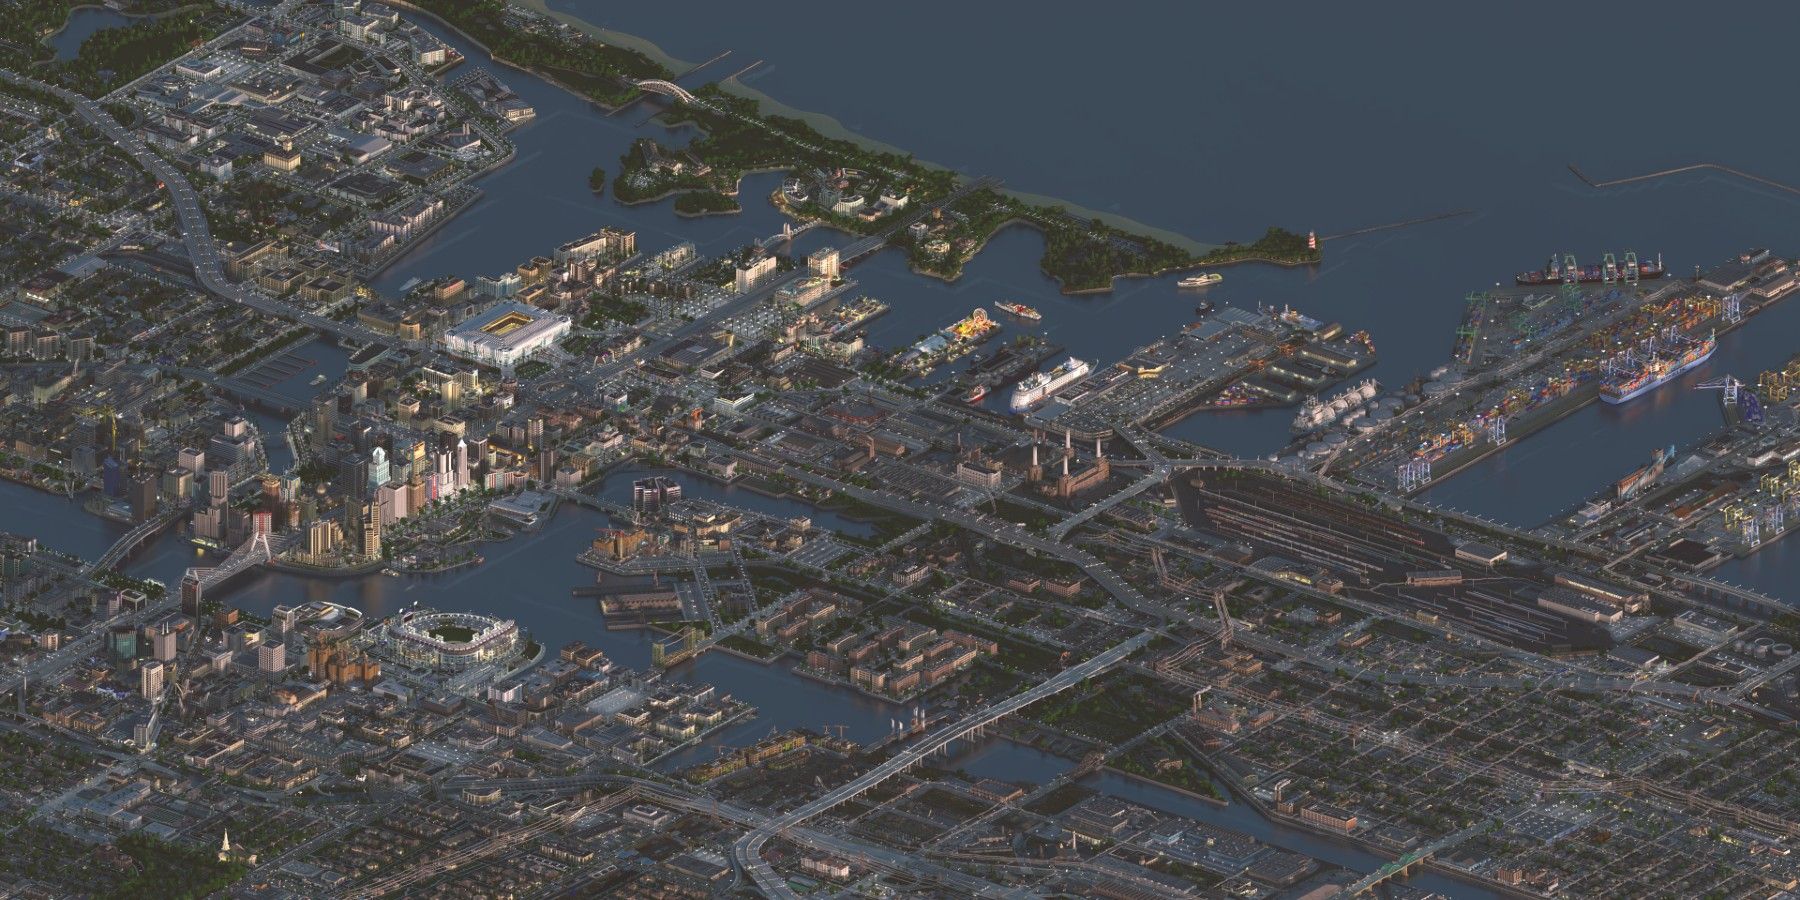 Huge Minecraft Citys Aerial View Looks Like the SimCity We Deserve